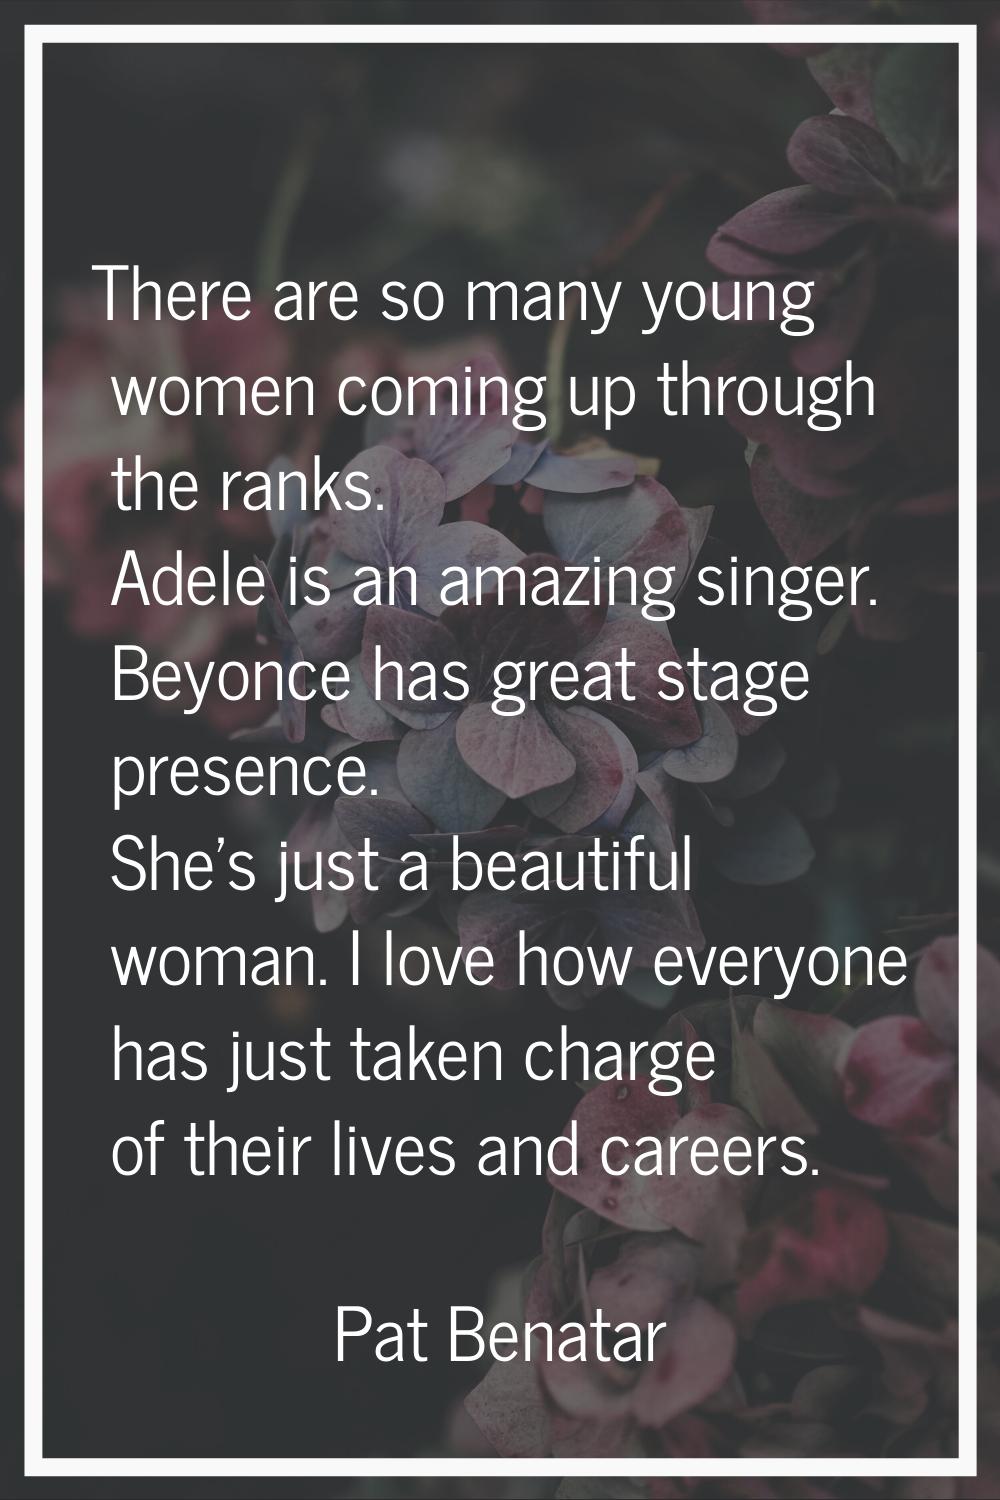 There are so many young women coming up through the ranks. Adele is an amazing singer. Beyonce has 